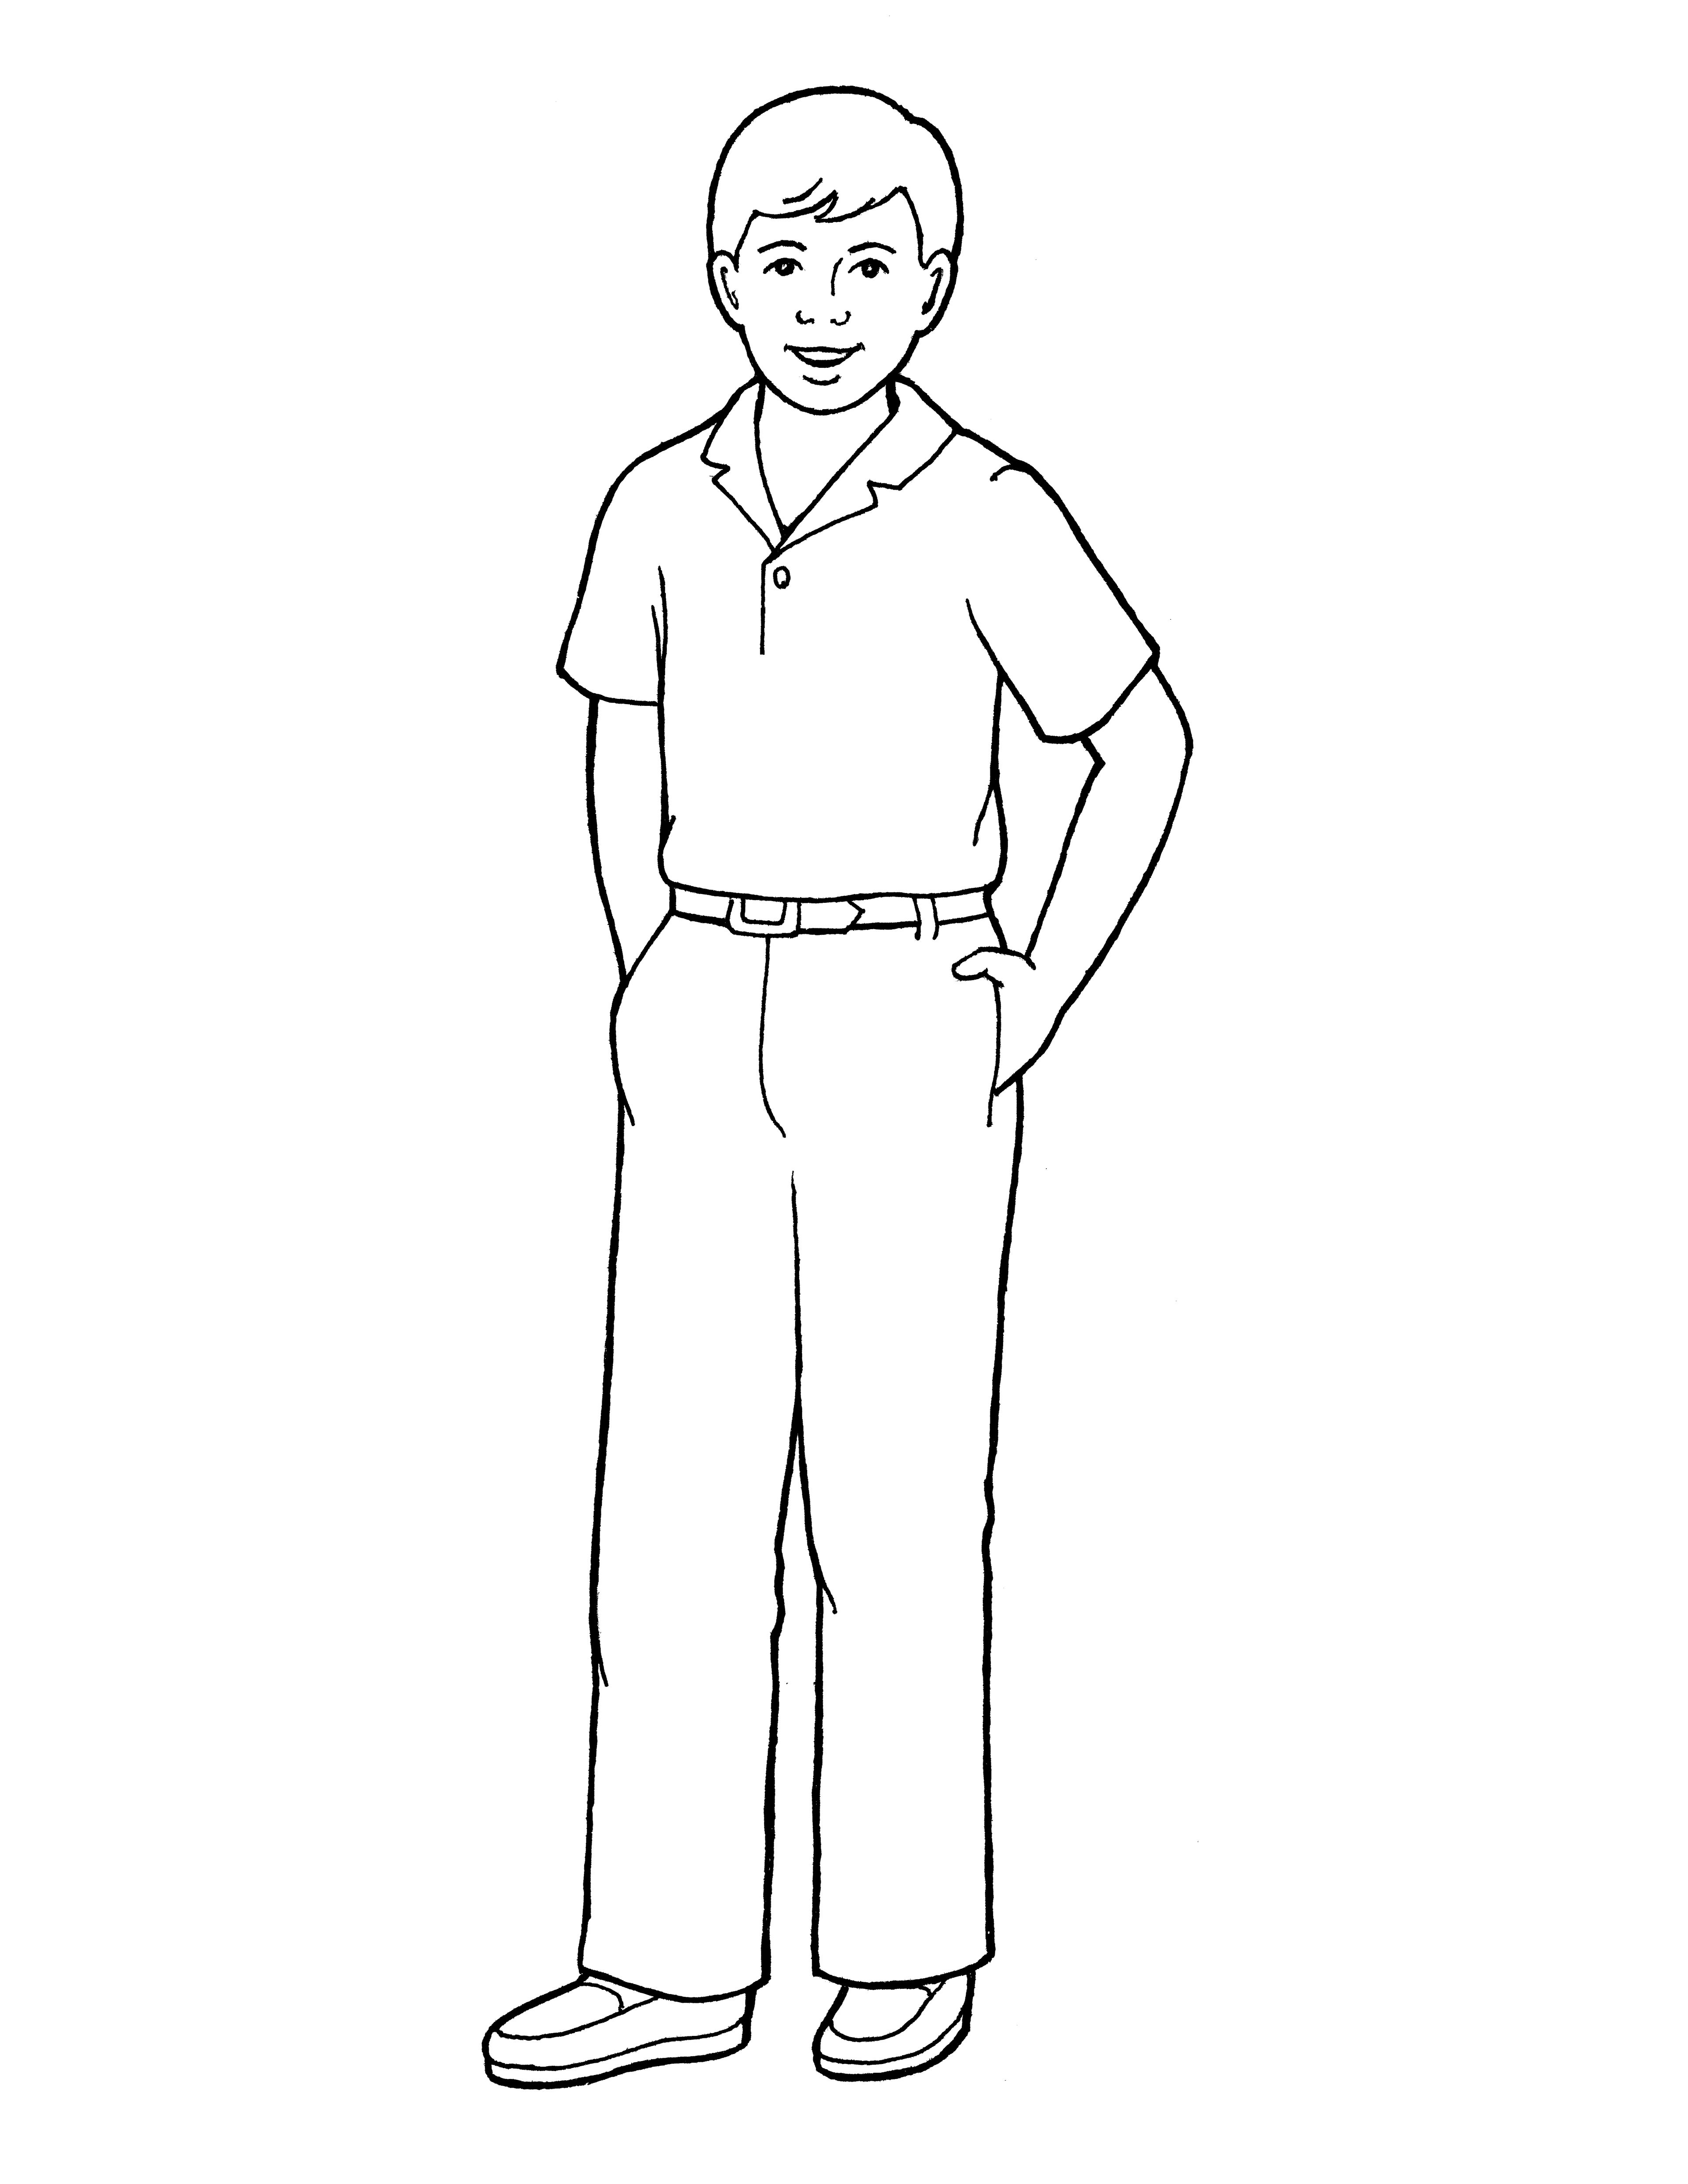 An illustration of a son or brother, from the nursery manual Behold Your Little Ones (2008), page 51.